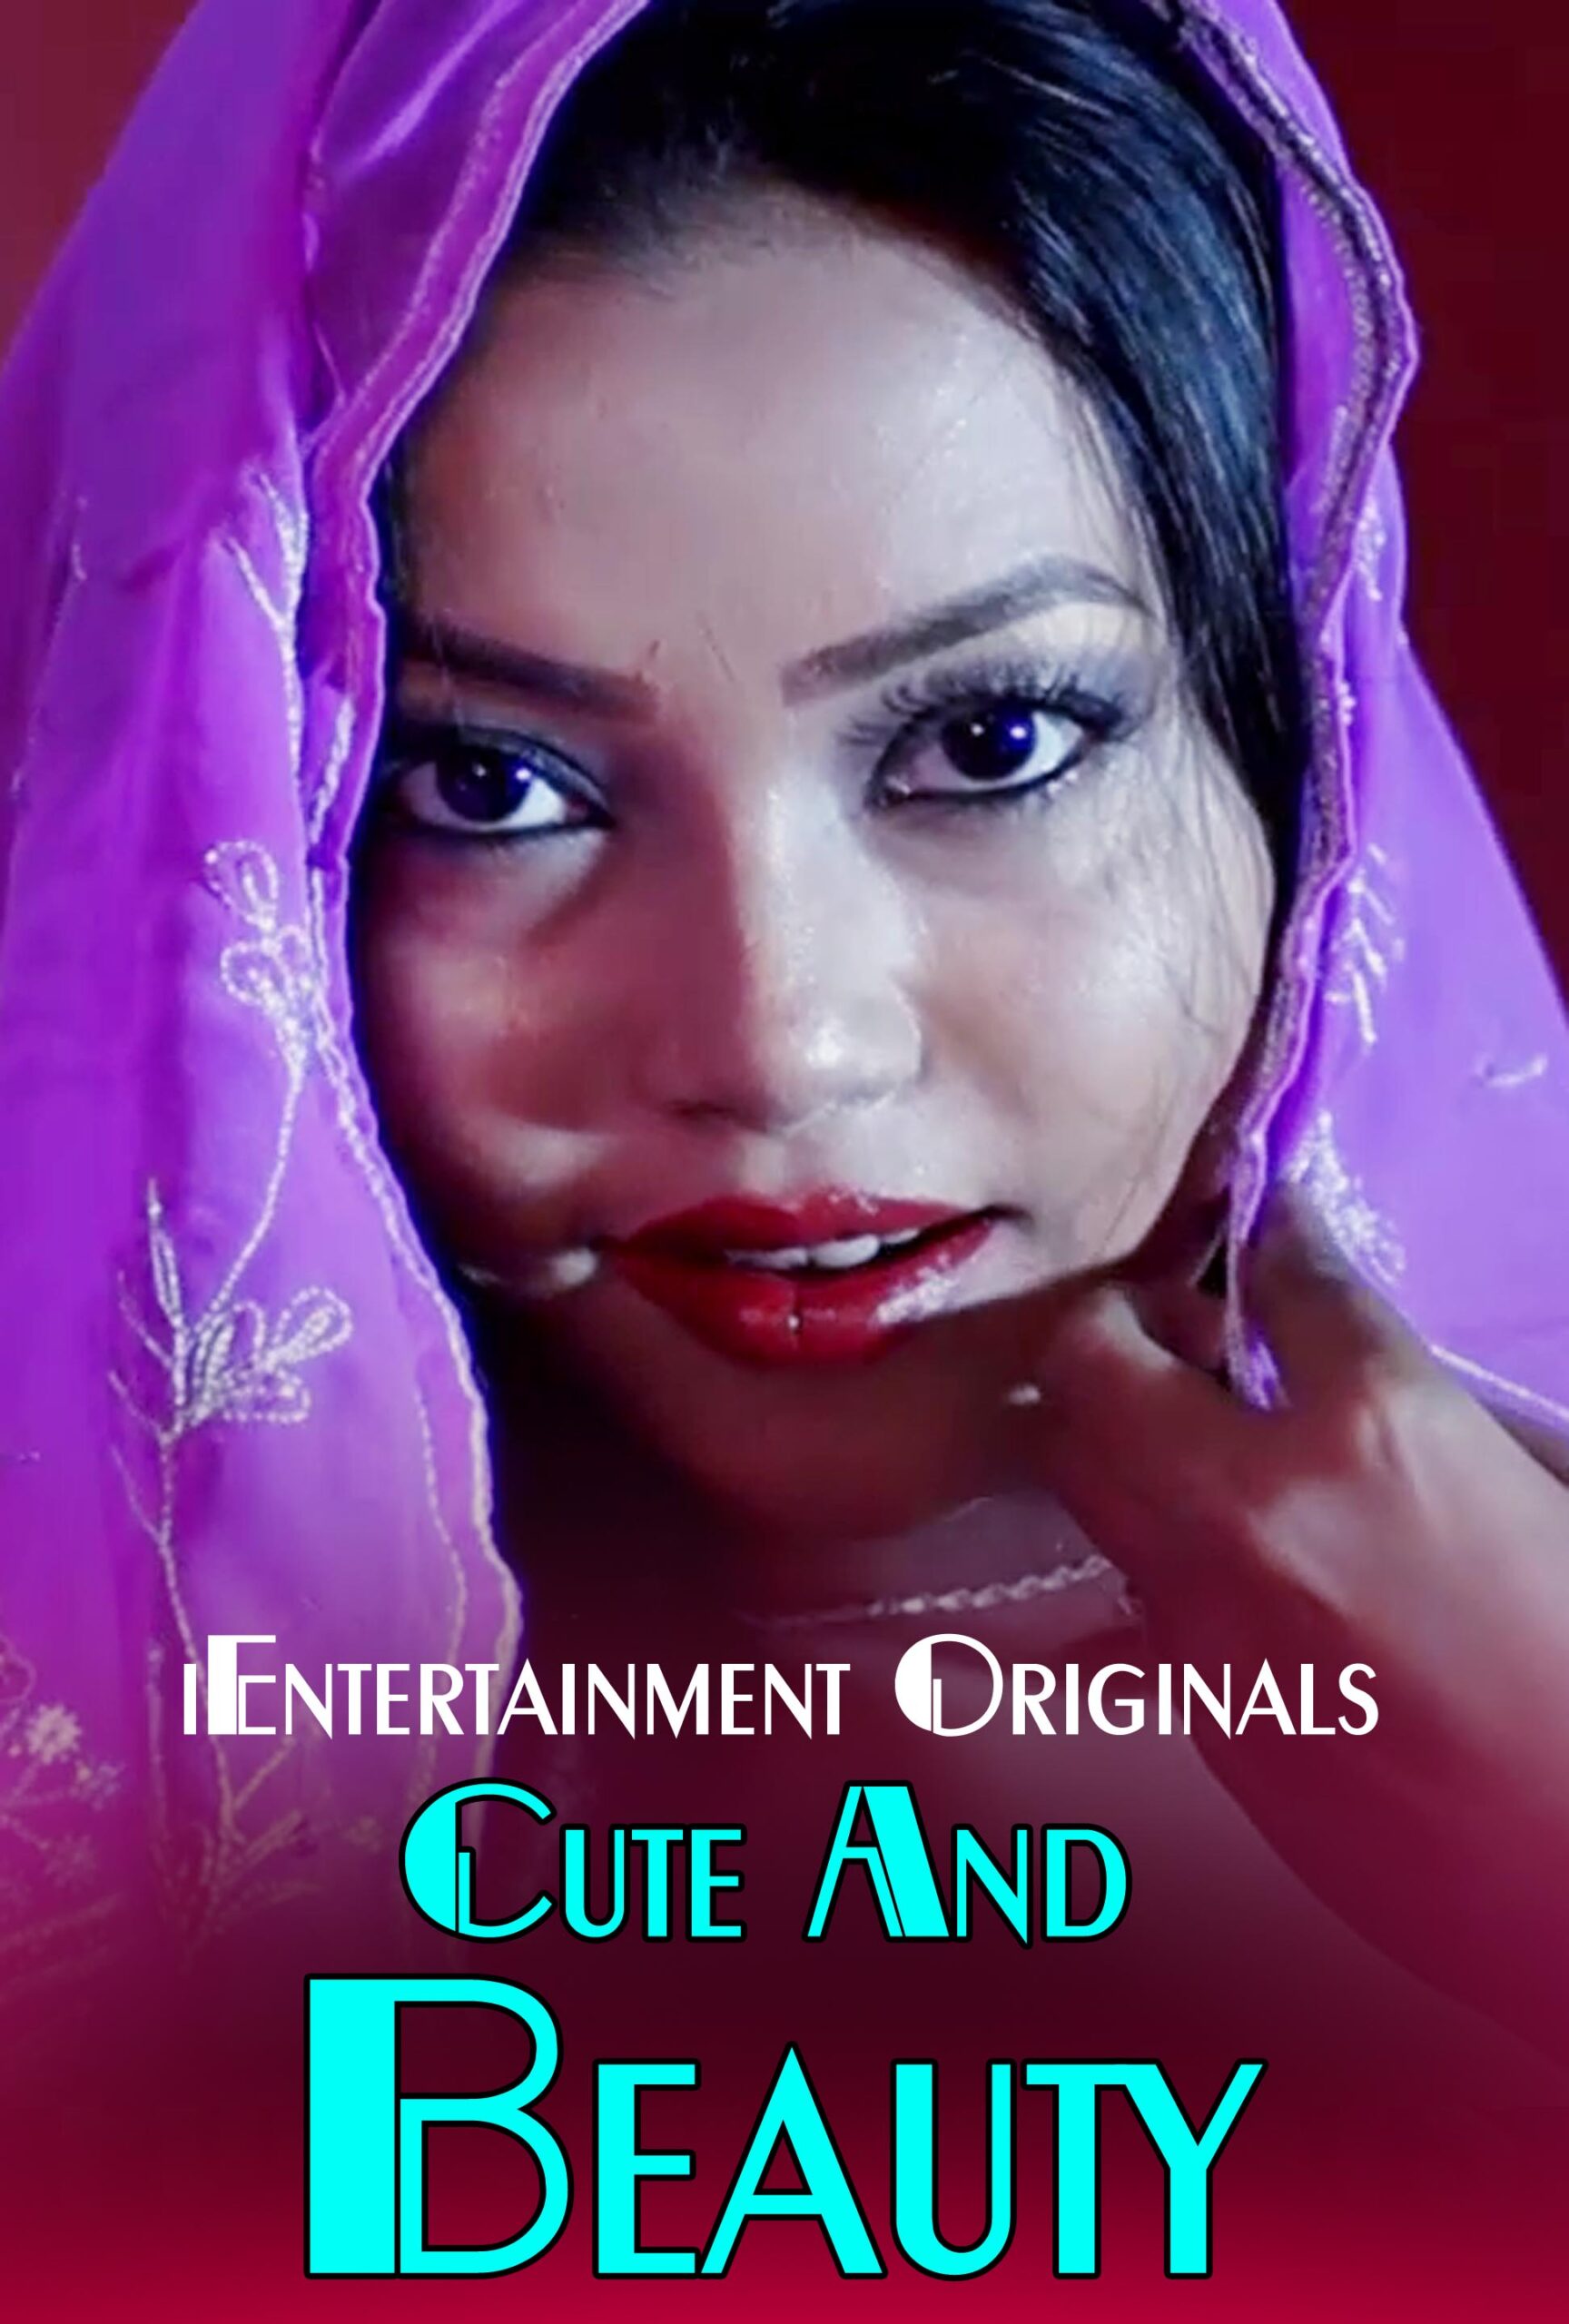 You are currently viewing Cute And Beauty 2020 iEntertainment Originals Hot Video 720p HDRip 150MB Download & Watch Online